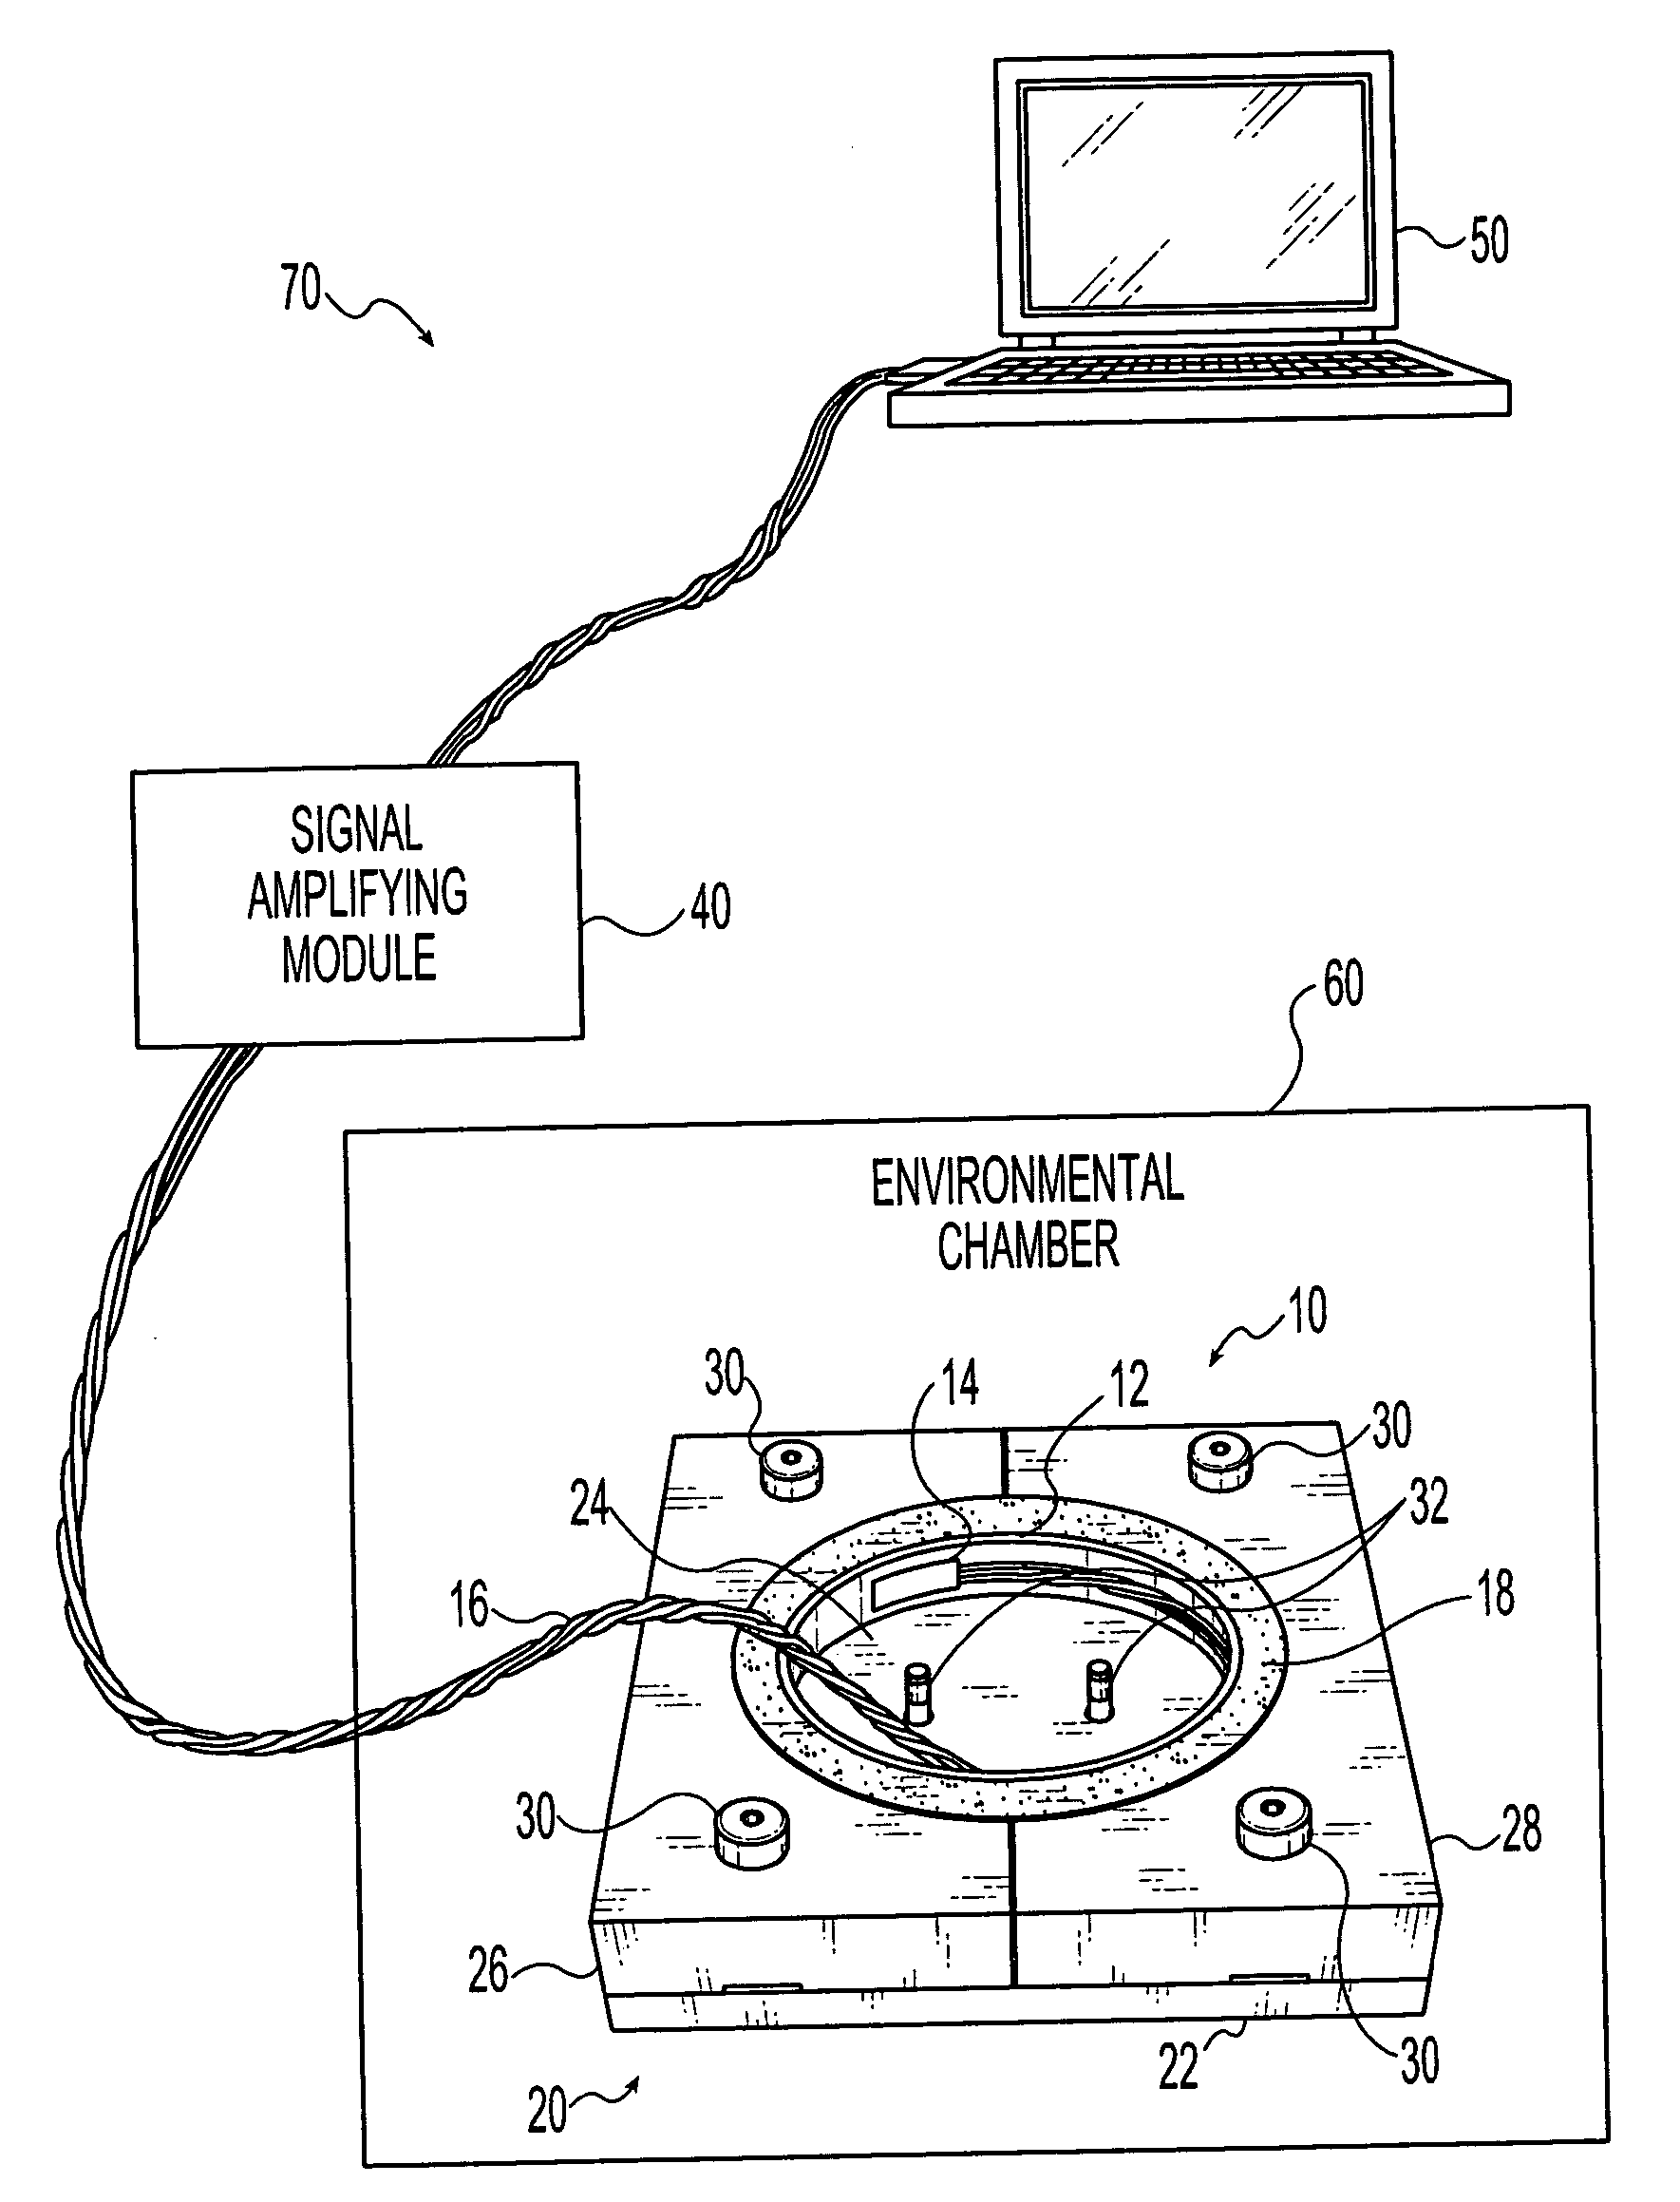 System for testing paving materials